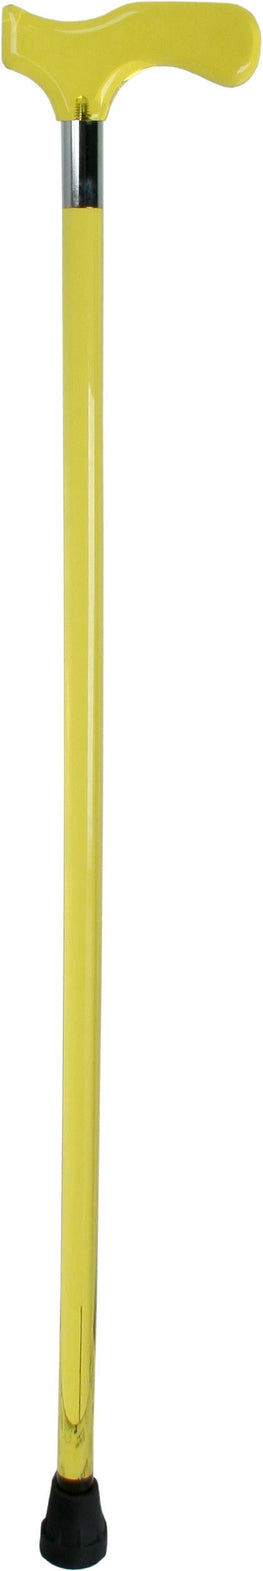 Royal Canes Yellow Lucite Derby Walking Cane With Yellow Lucite Shaft and Silver Collar